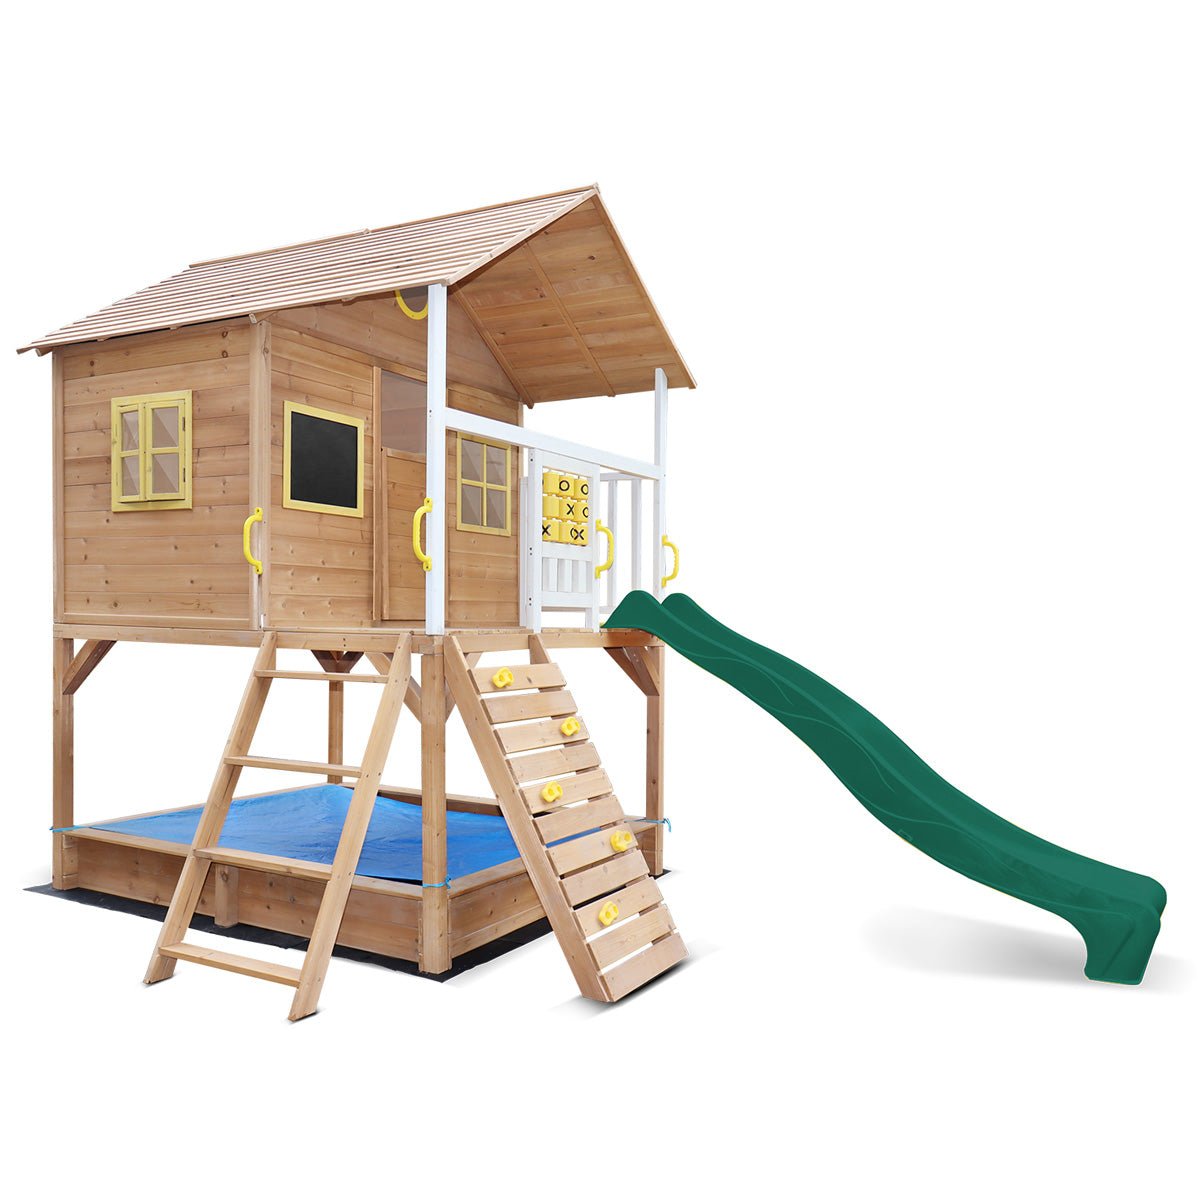 Explore Warrigal Cubby House with Green Slide: Create Lasting Memories